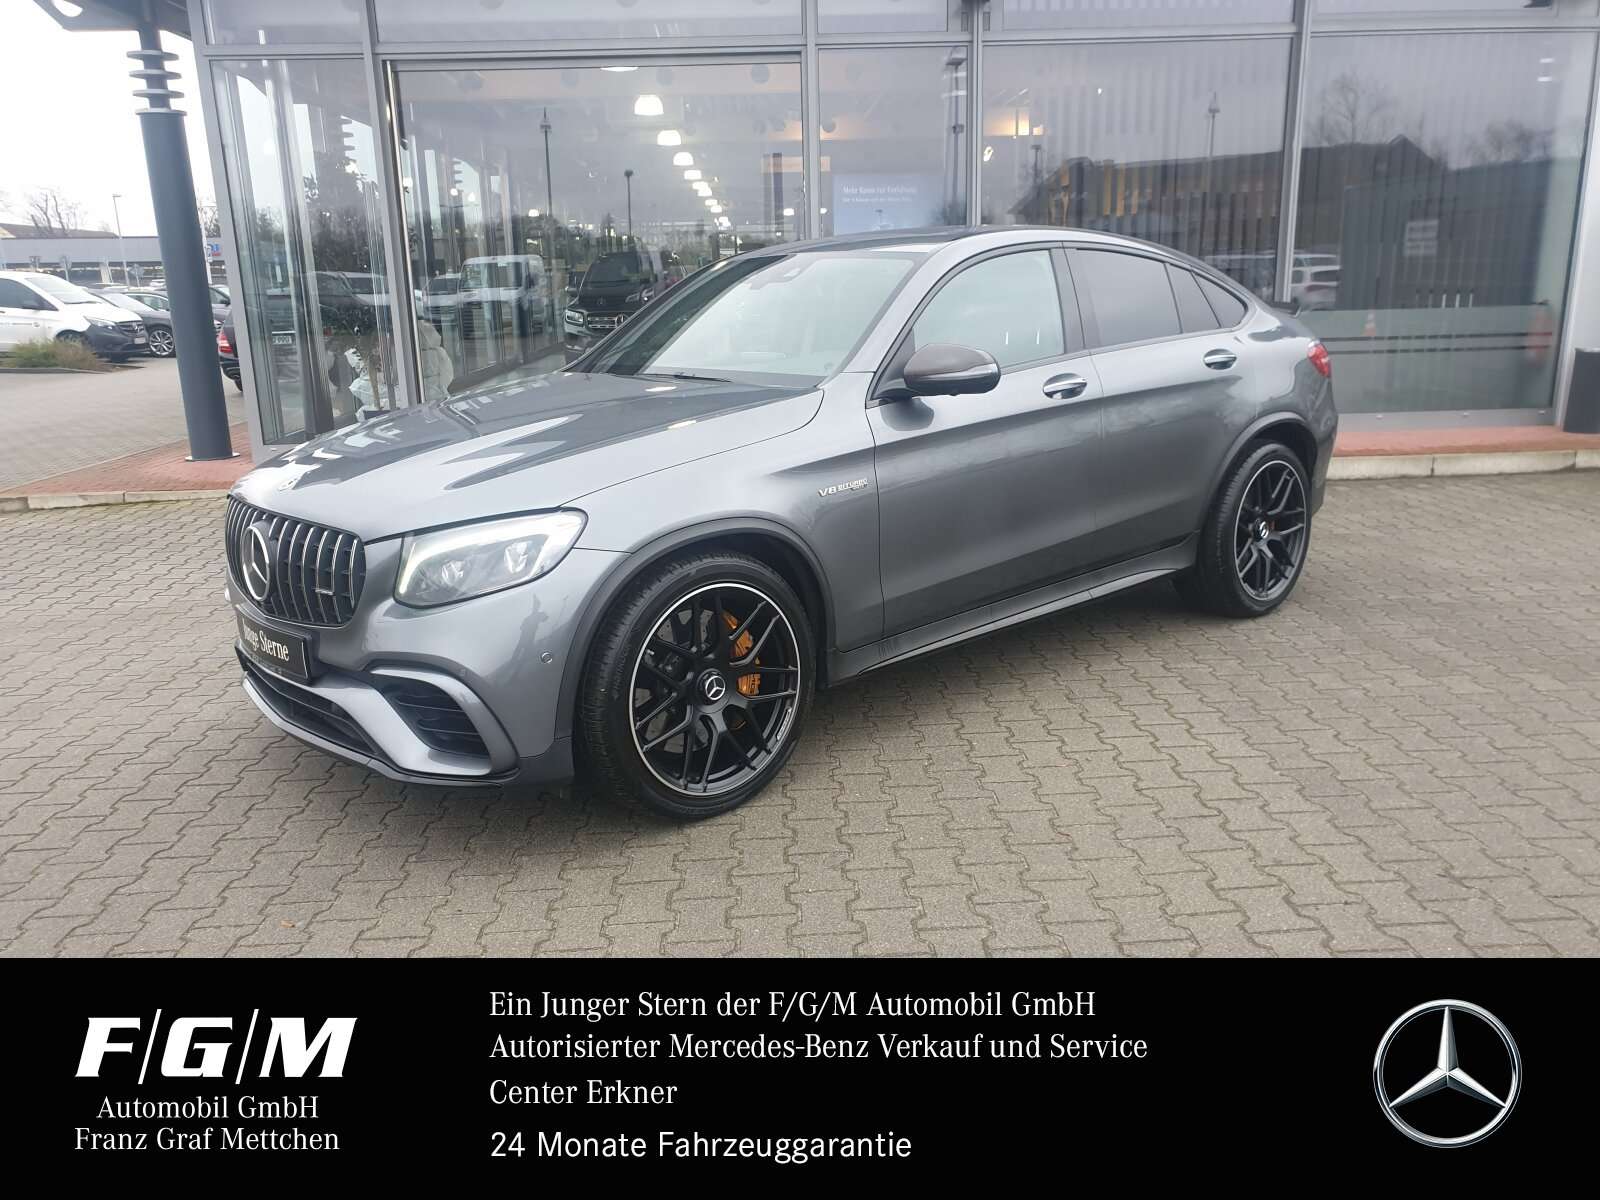 Mercedes-Benz GLC 63 AMG Coupe in Grey used in Erkner for € 81,630.-